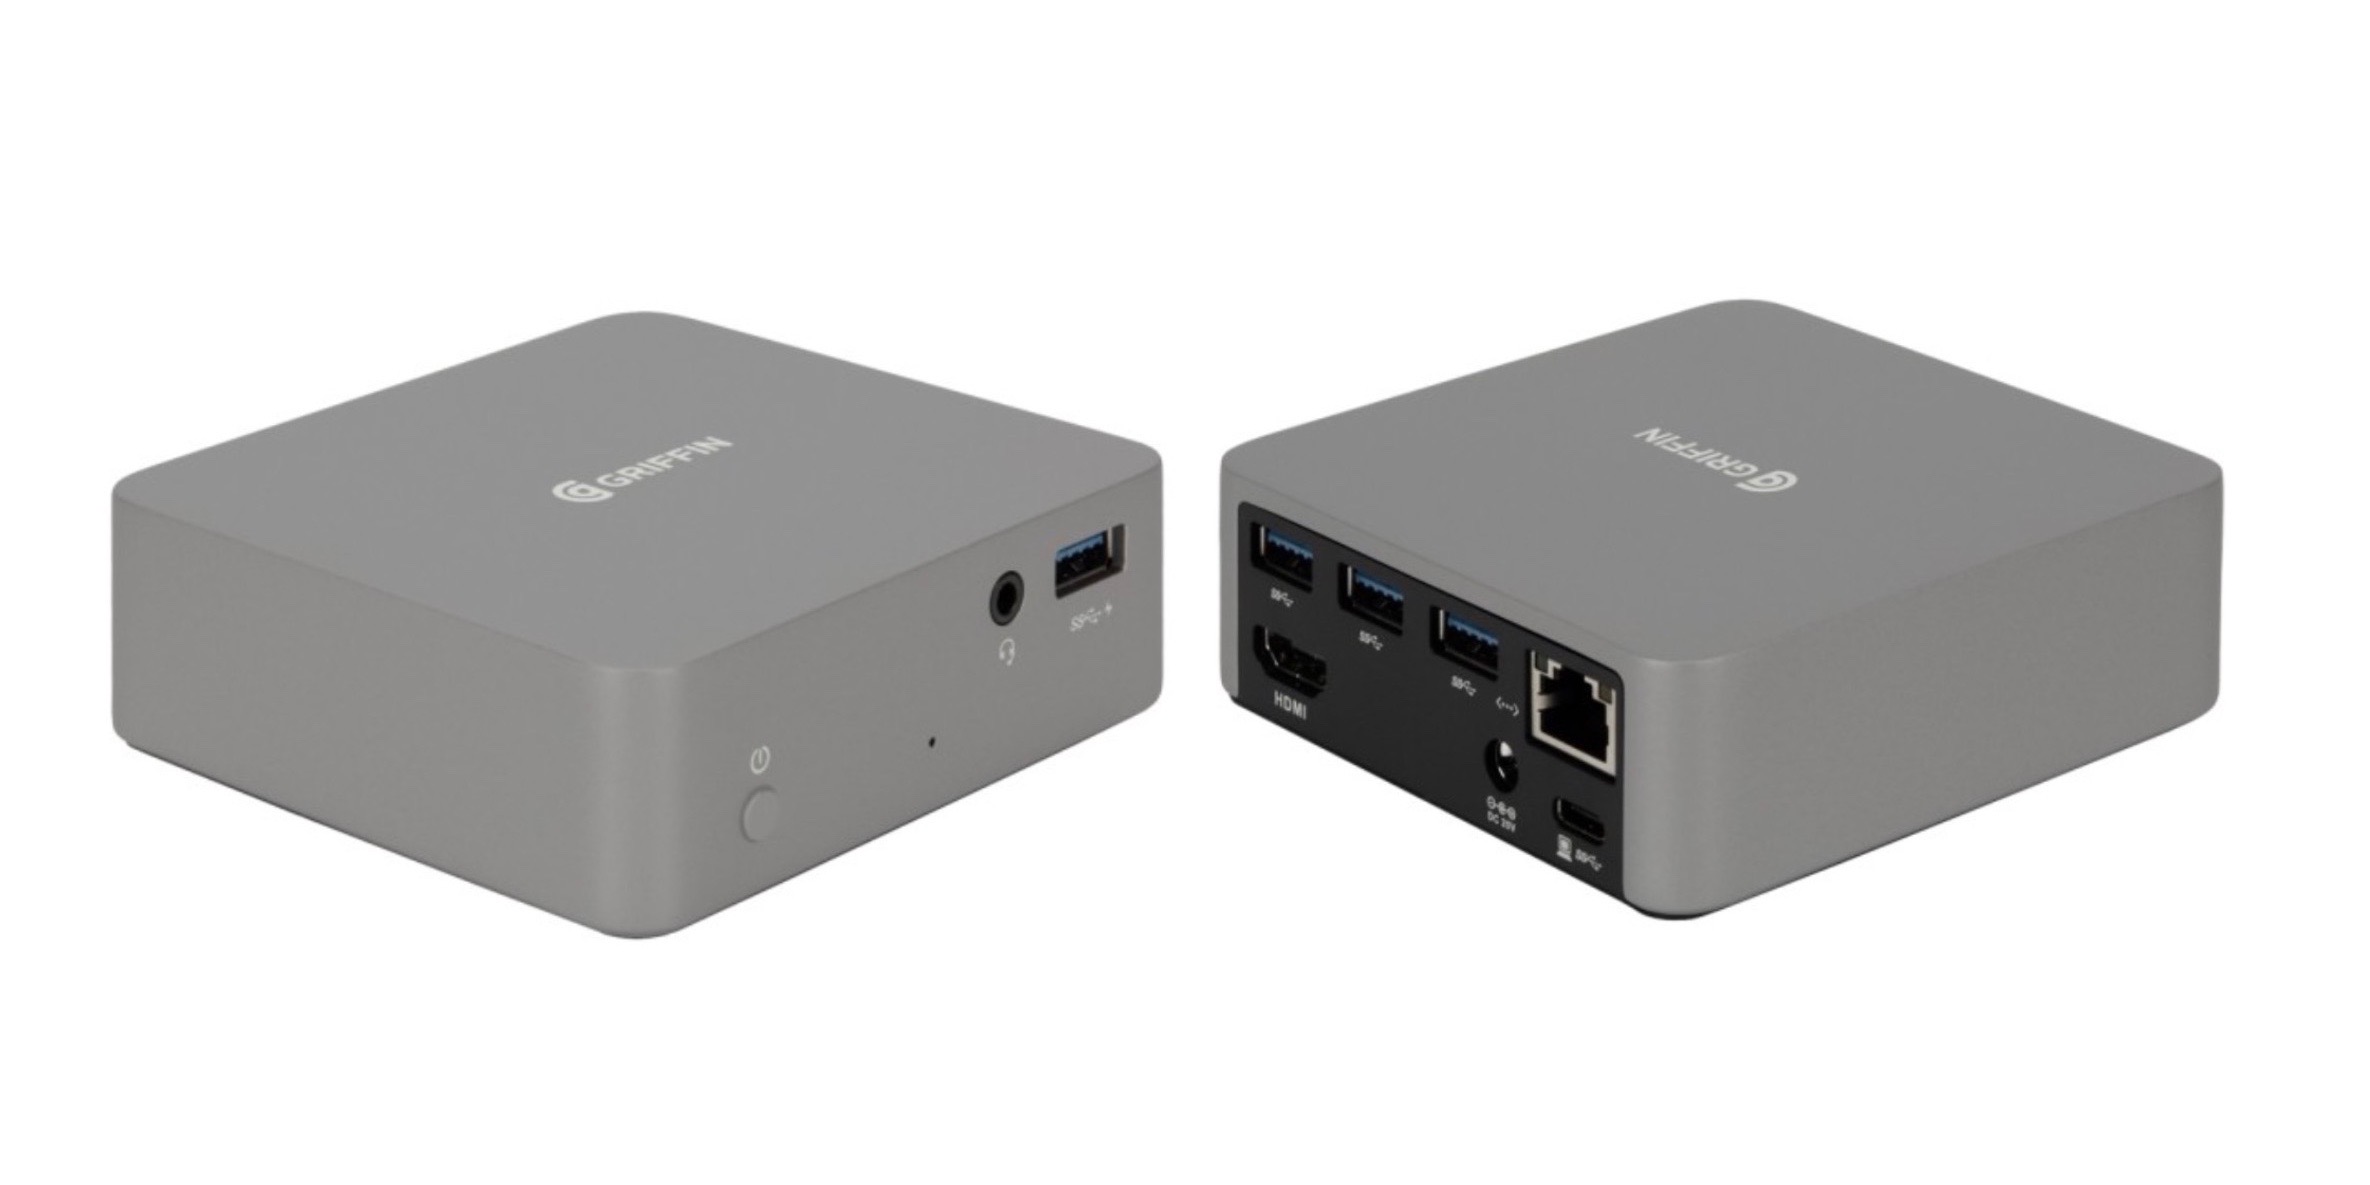 does the owc usb-c dock for mac book pro charge the laptop